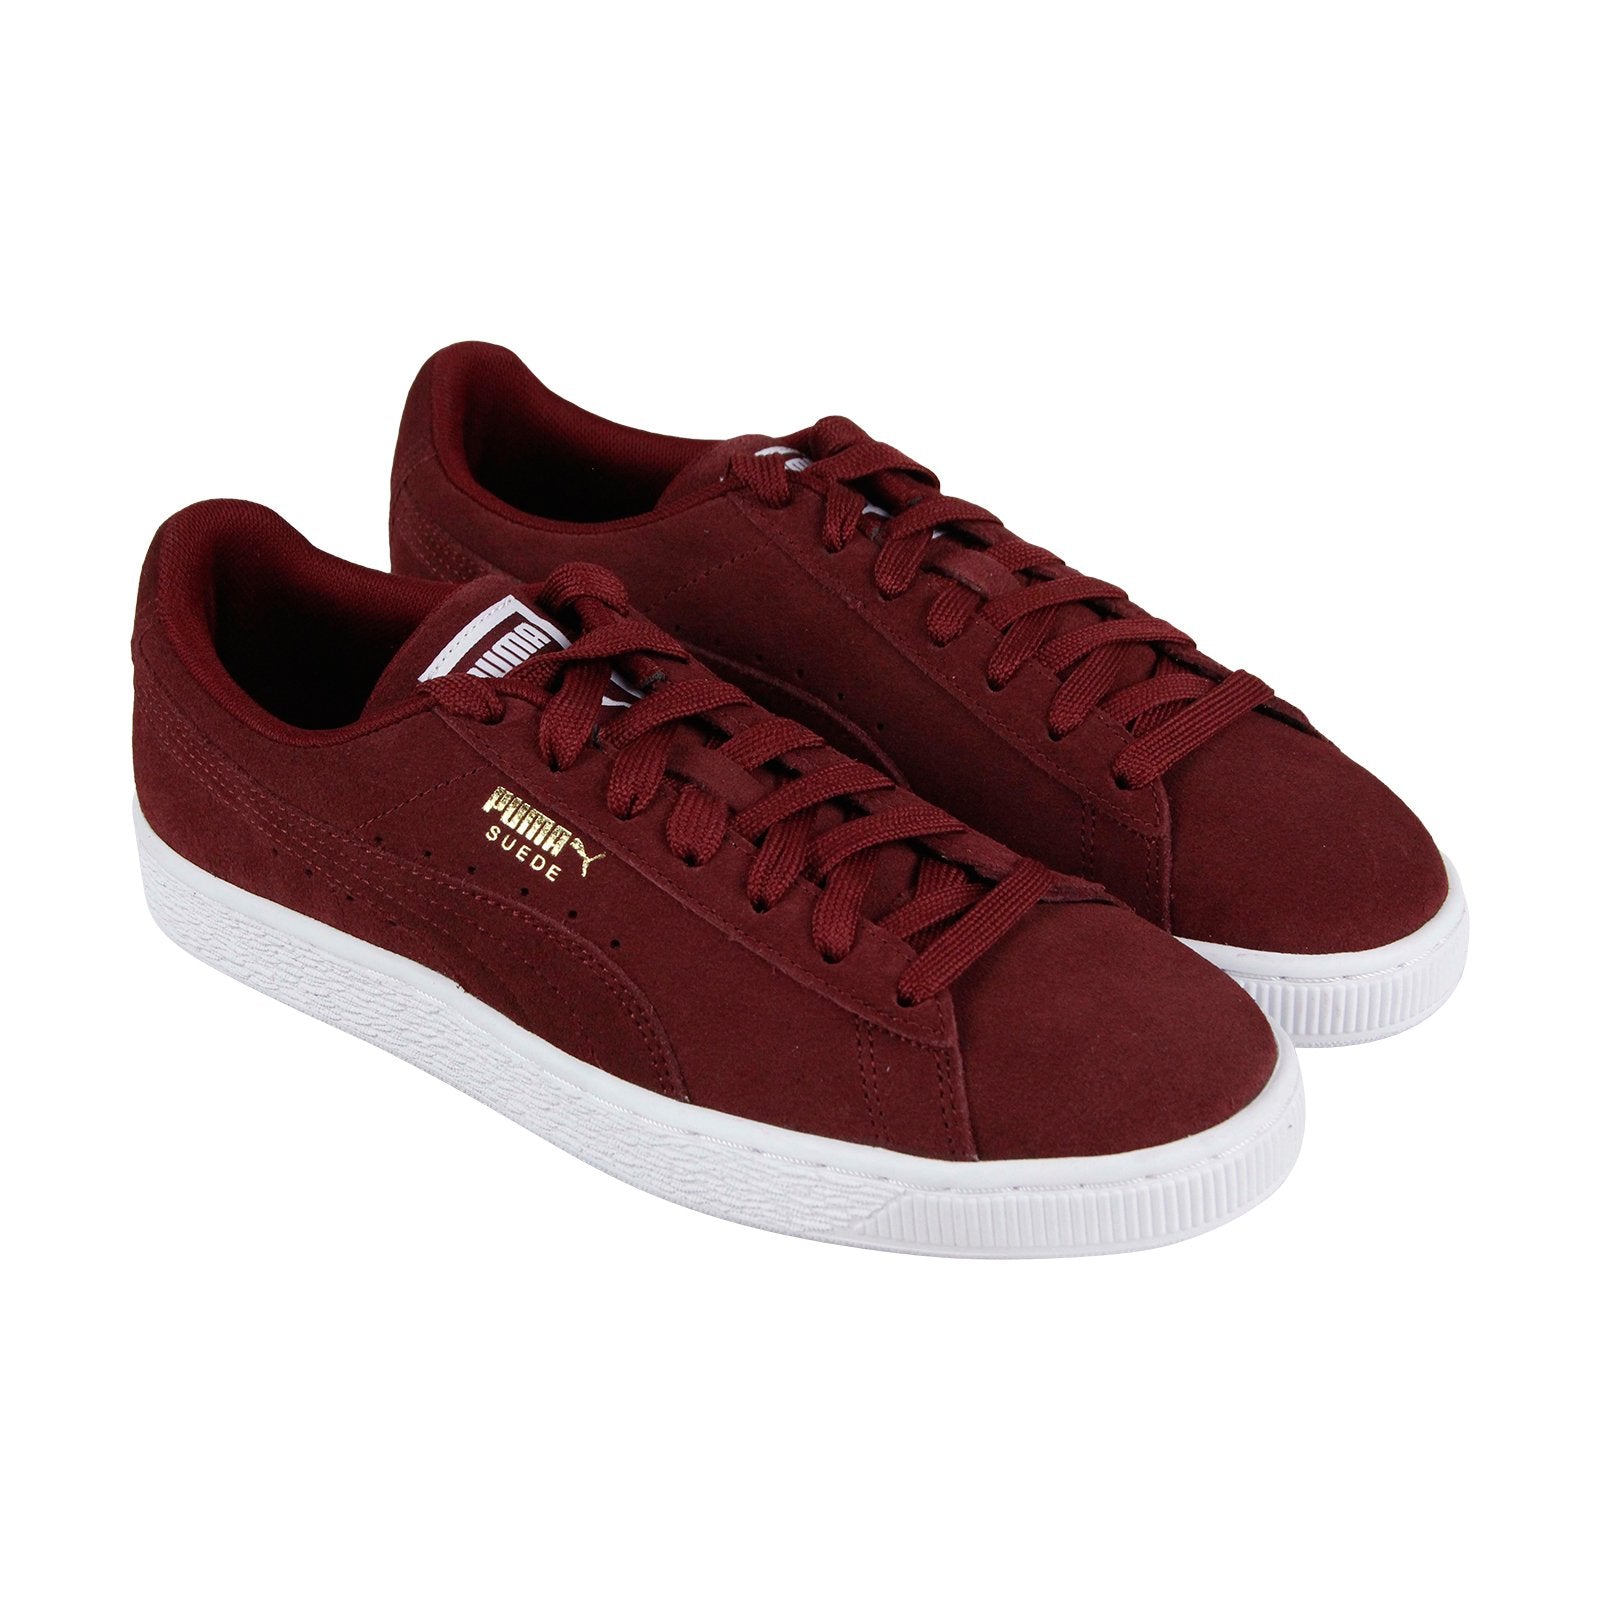 Puma Suede Classic + 35656881 Mens Burgundy Lace Up Lifestyle Sneakers ...